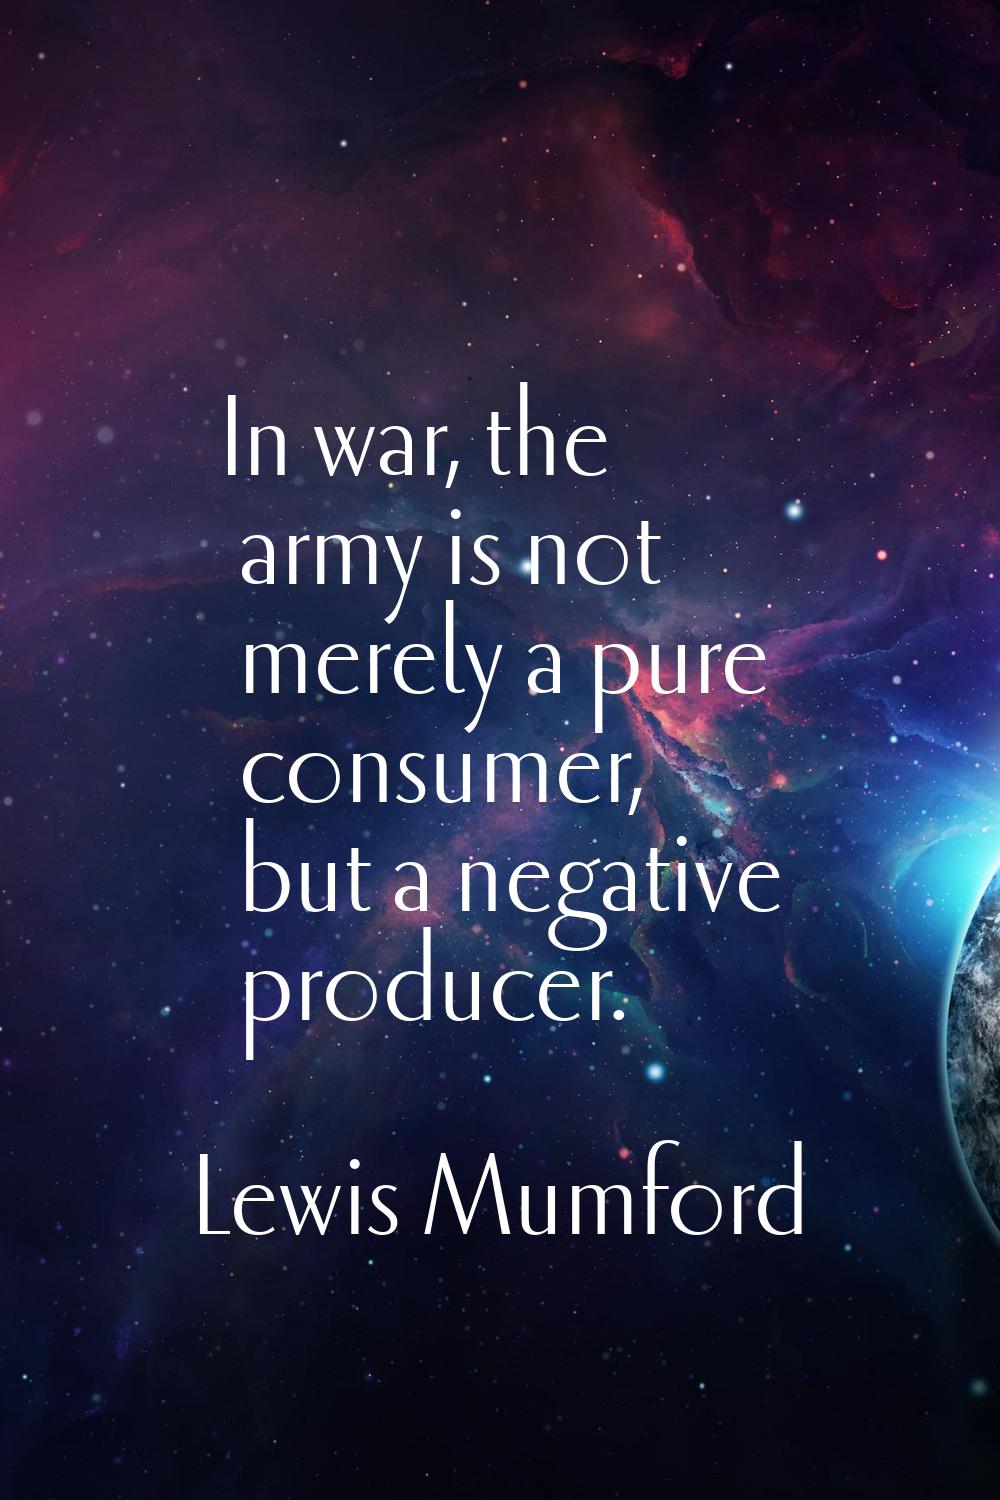 In war, the army is not merely a pure consumer, but a negative producer.